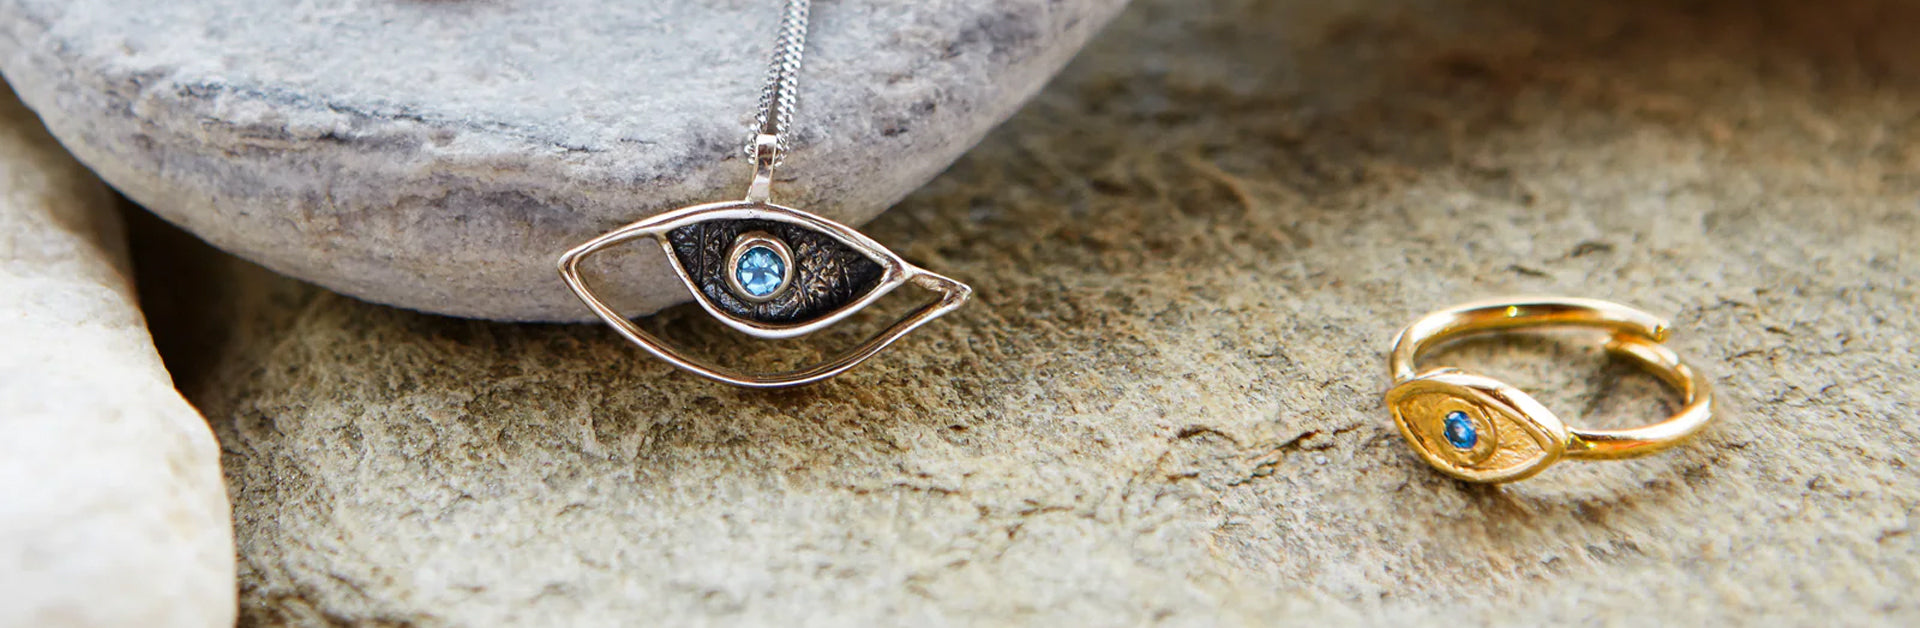 Everything about Evil Eye jewelry you need to know